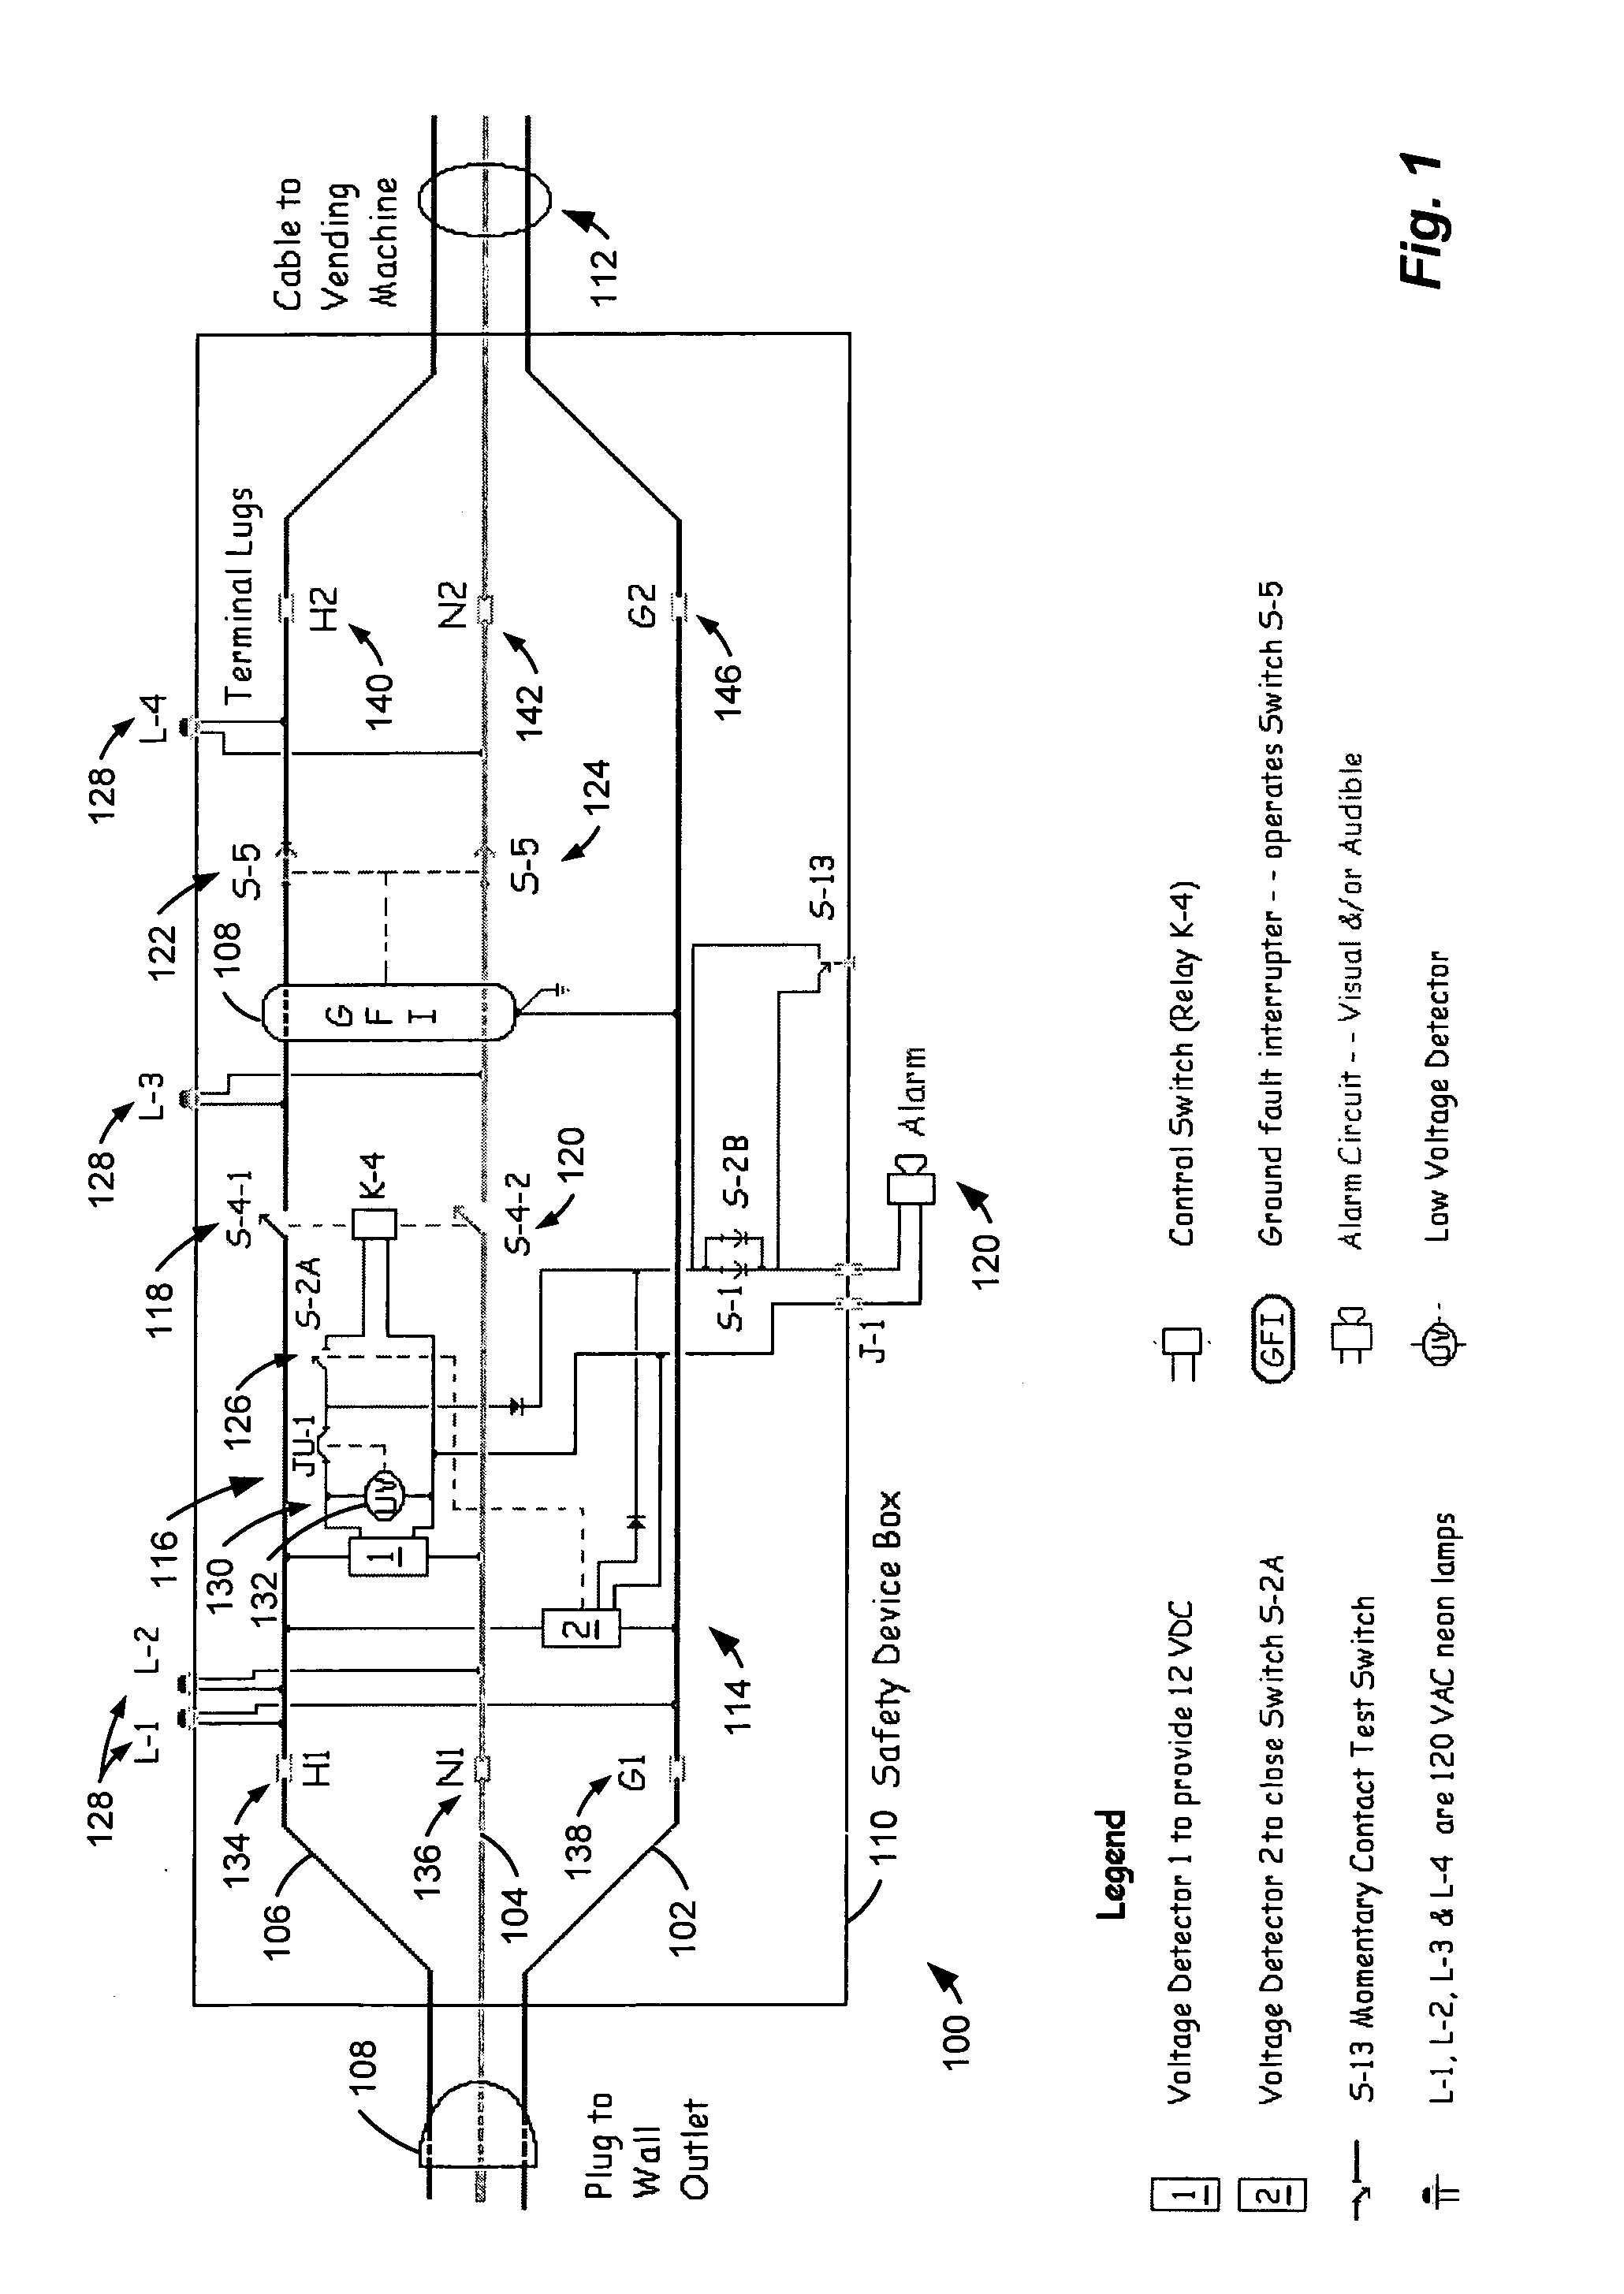 Safety device for prevention of electrical shocks